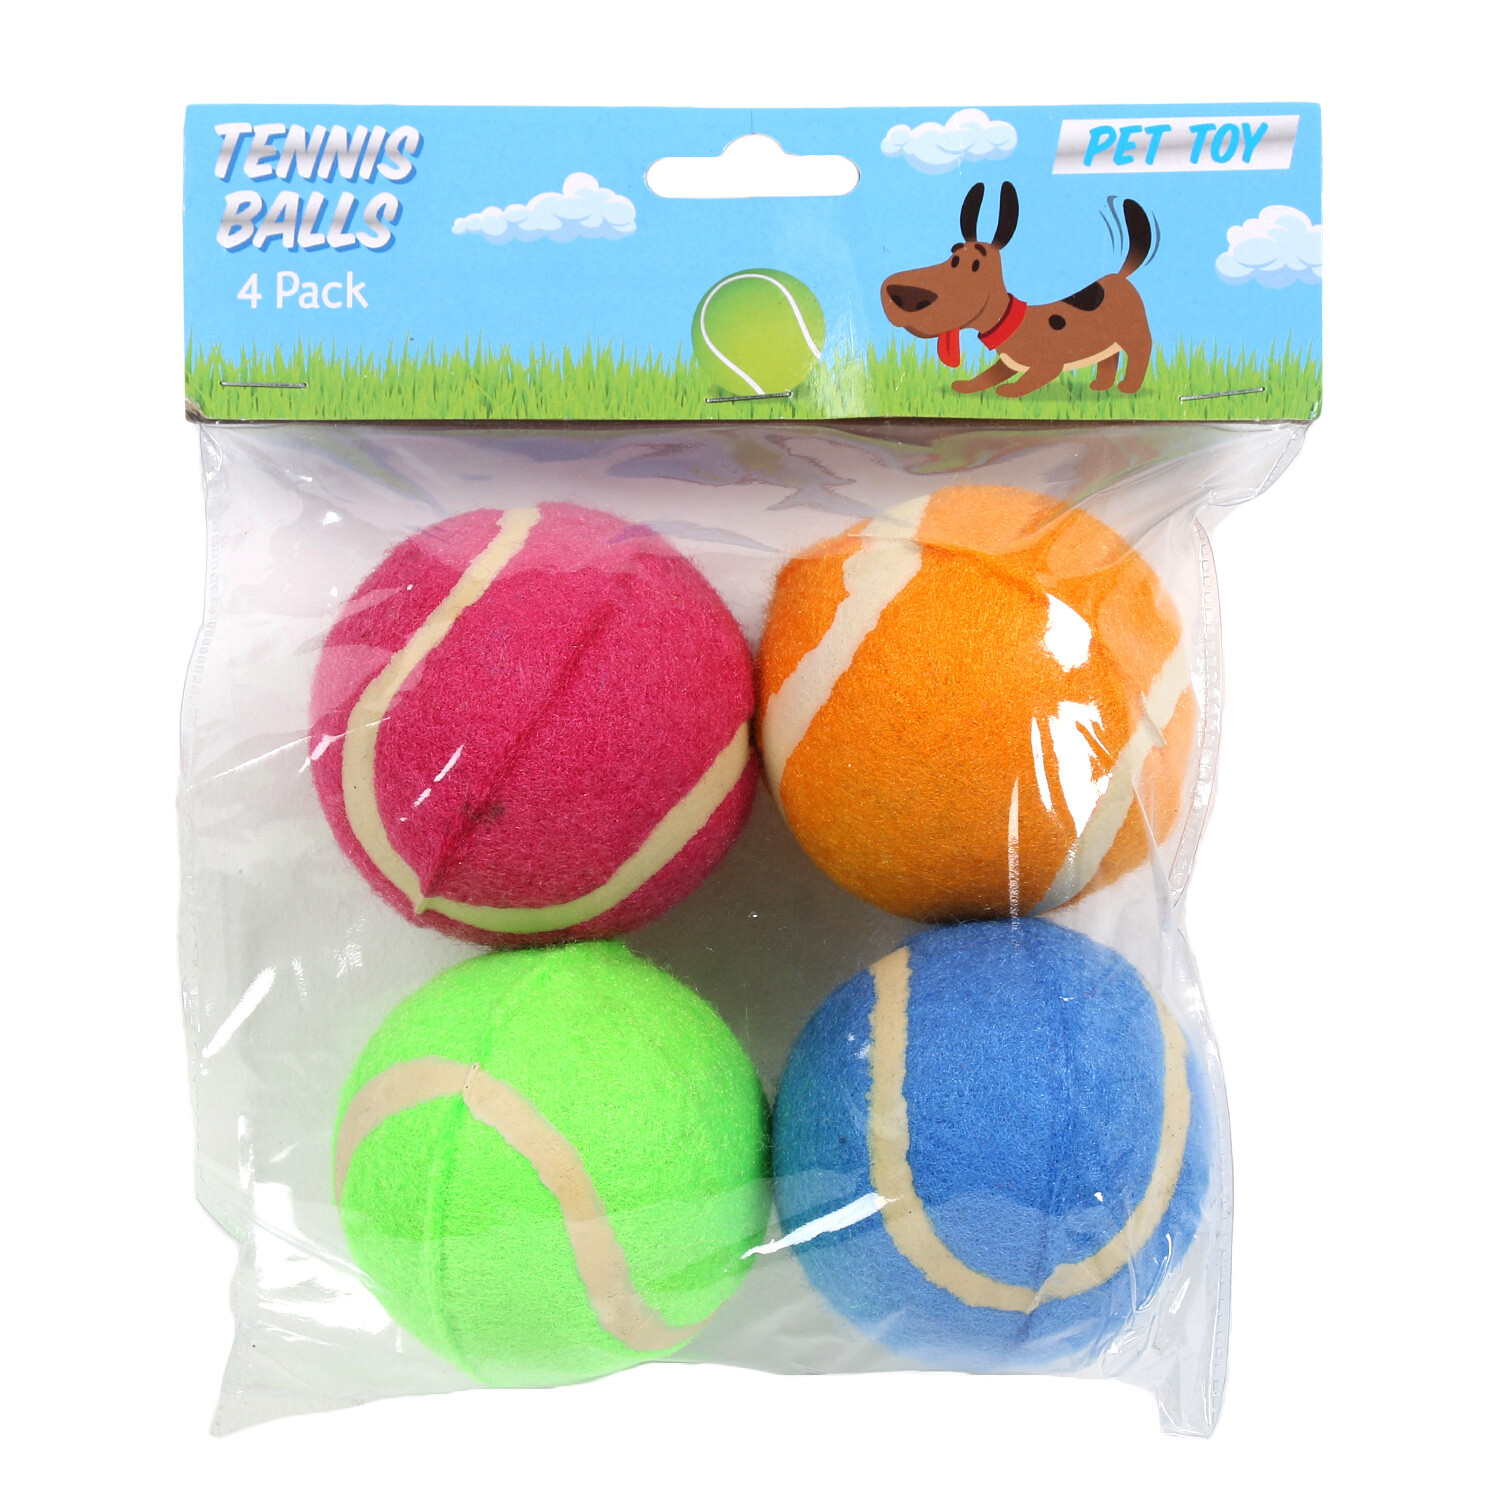 Tennis Ball Dog Toy 4 Pack Image 1